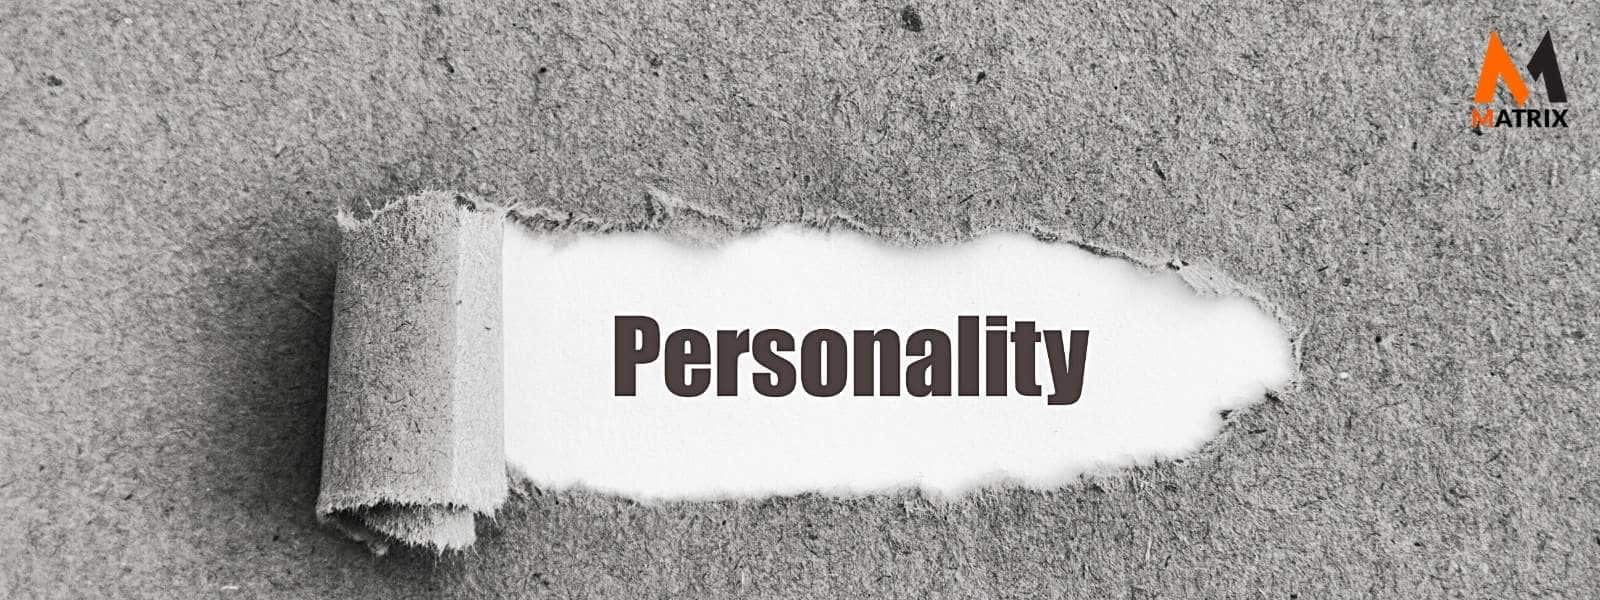 How to align your brand with brand archetype personality